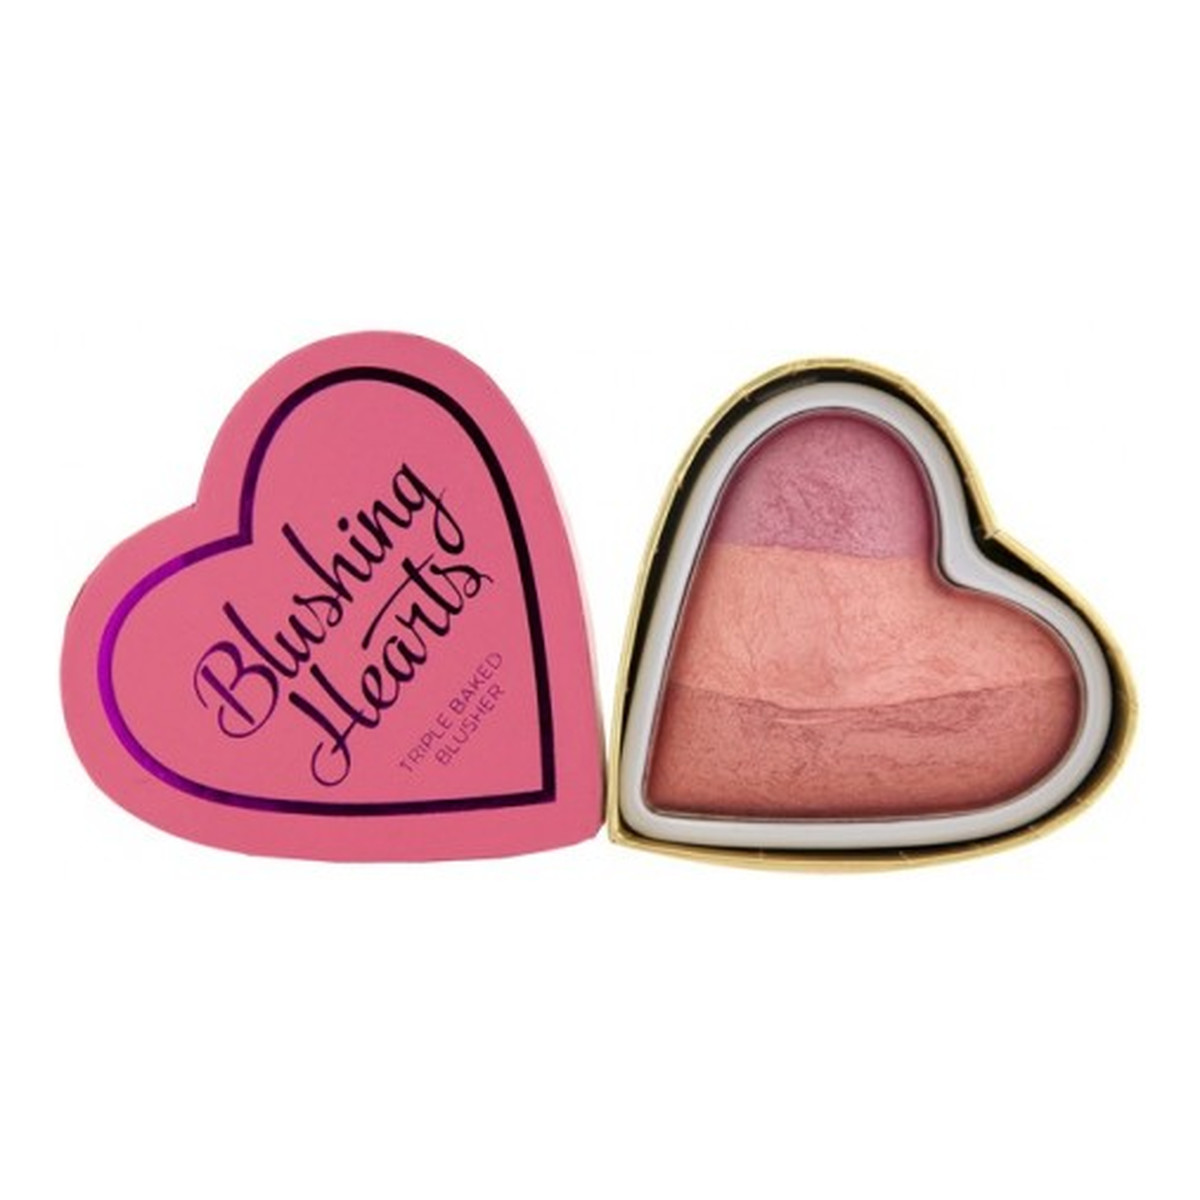 Makeup Revolution Blushing Hearts Candy Queen of Hearts Róż Do Policzków 10g